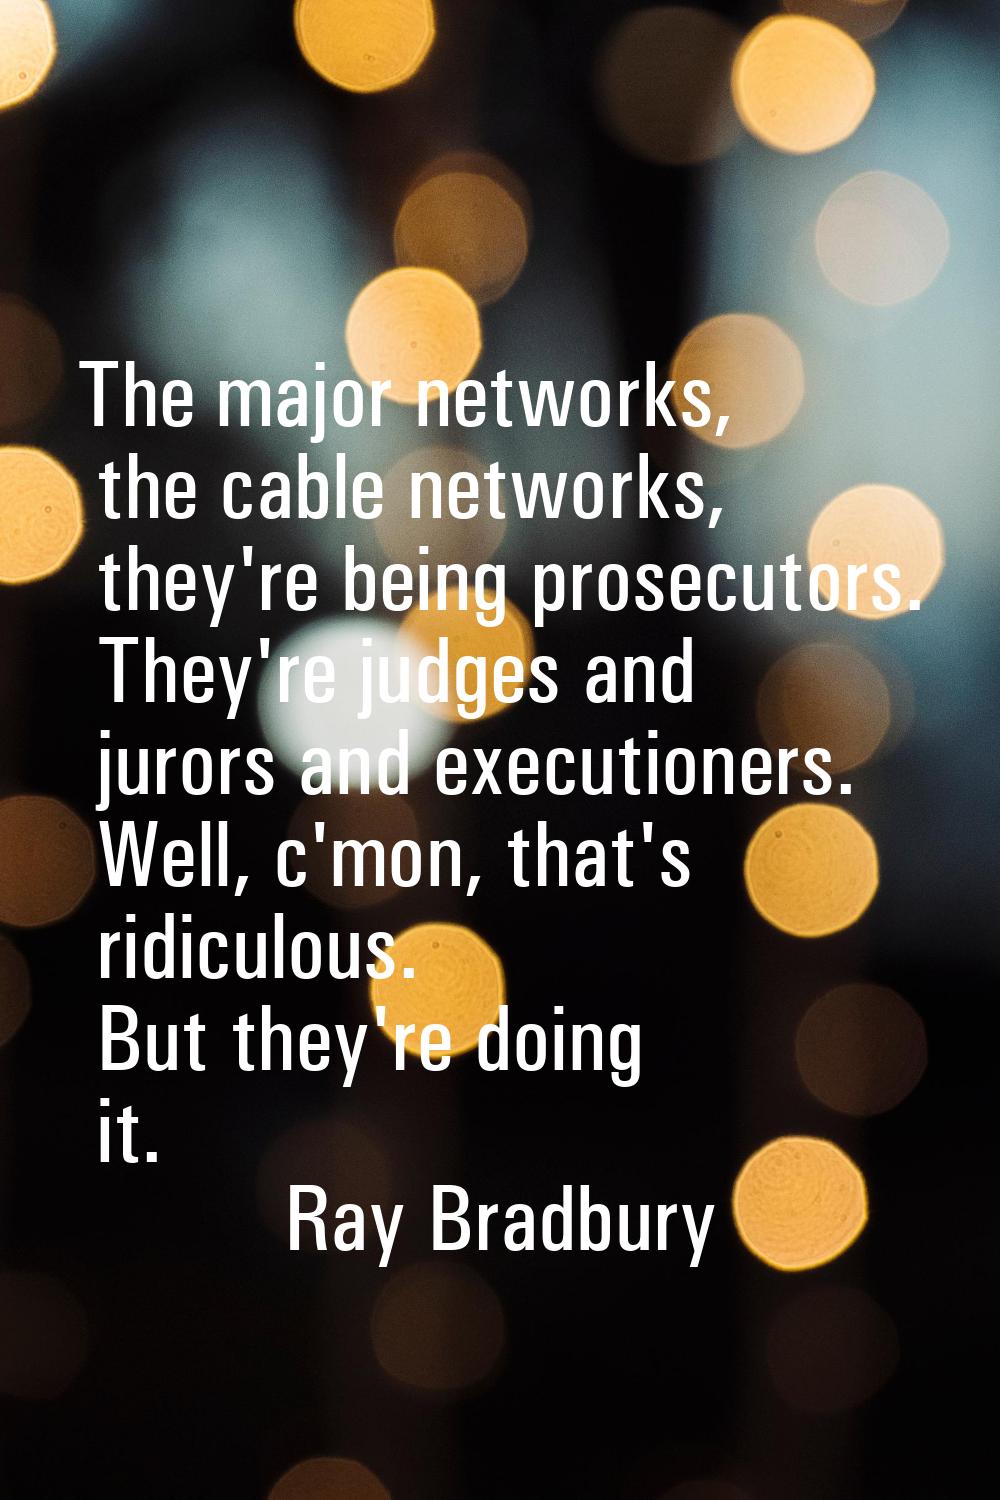 The major networks, the cable networks, they're being prosecutors. They're judges and jurors and ex